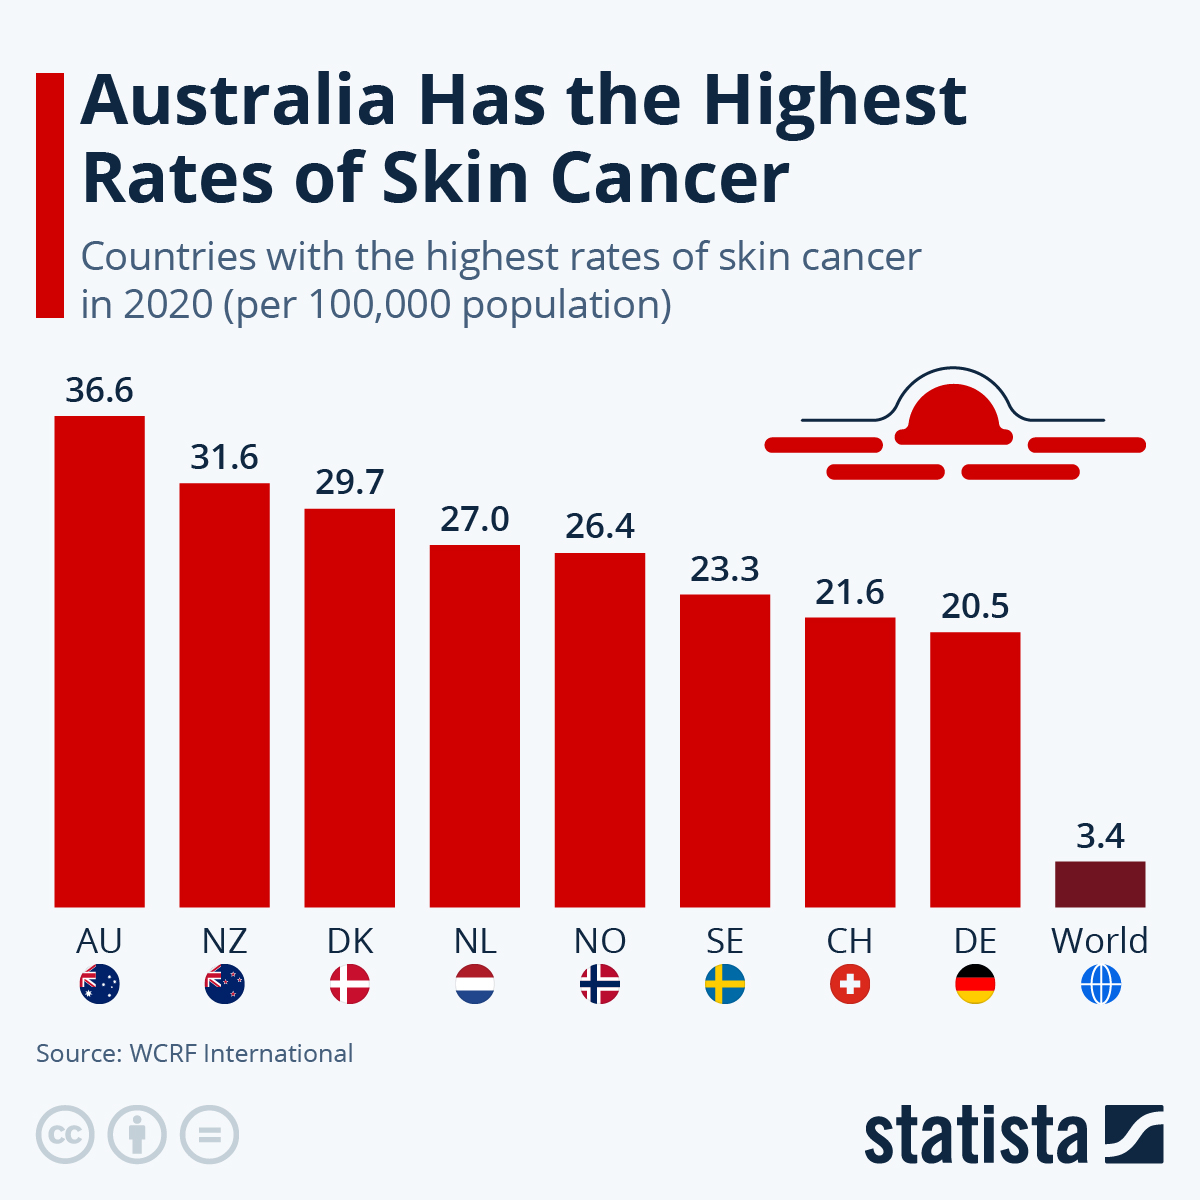 Australians are at the highest risk of skin #cancer, with around 37 cases of melanoma of skin per 100,000 population in 2020, according to data from the World Cancer Research Fund (#WCRF) International. It was followed by New Zealand with nearly 32 cases per 100,000 population.